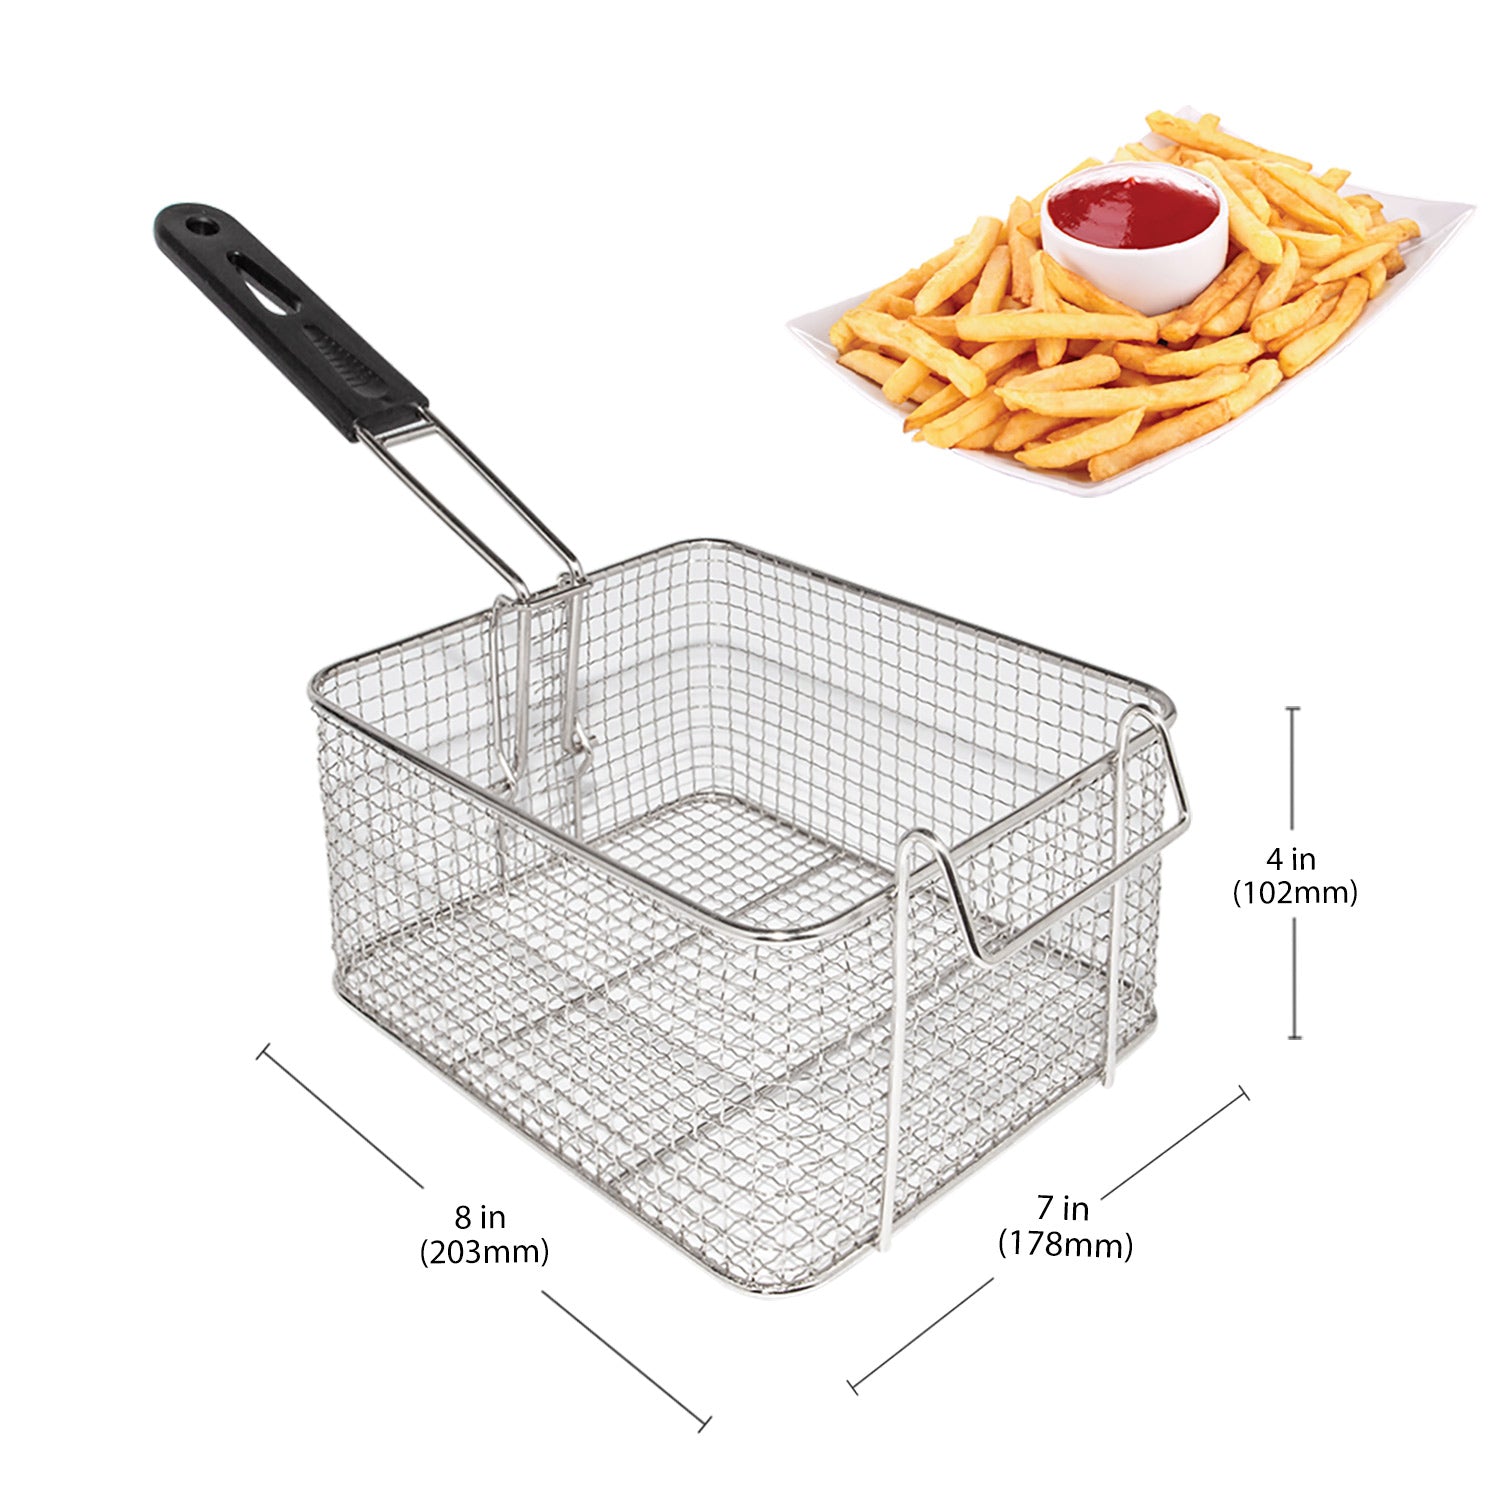 AR-HEF82 Double Deep Fryer | 2-Basket Electric Fryer for Commercial Use | Stainless Steel | 12 L Capacity